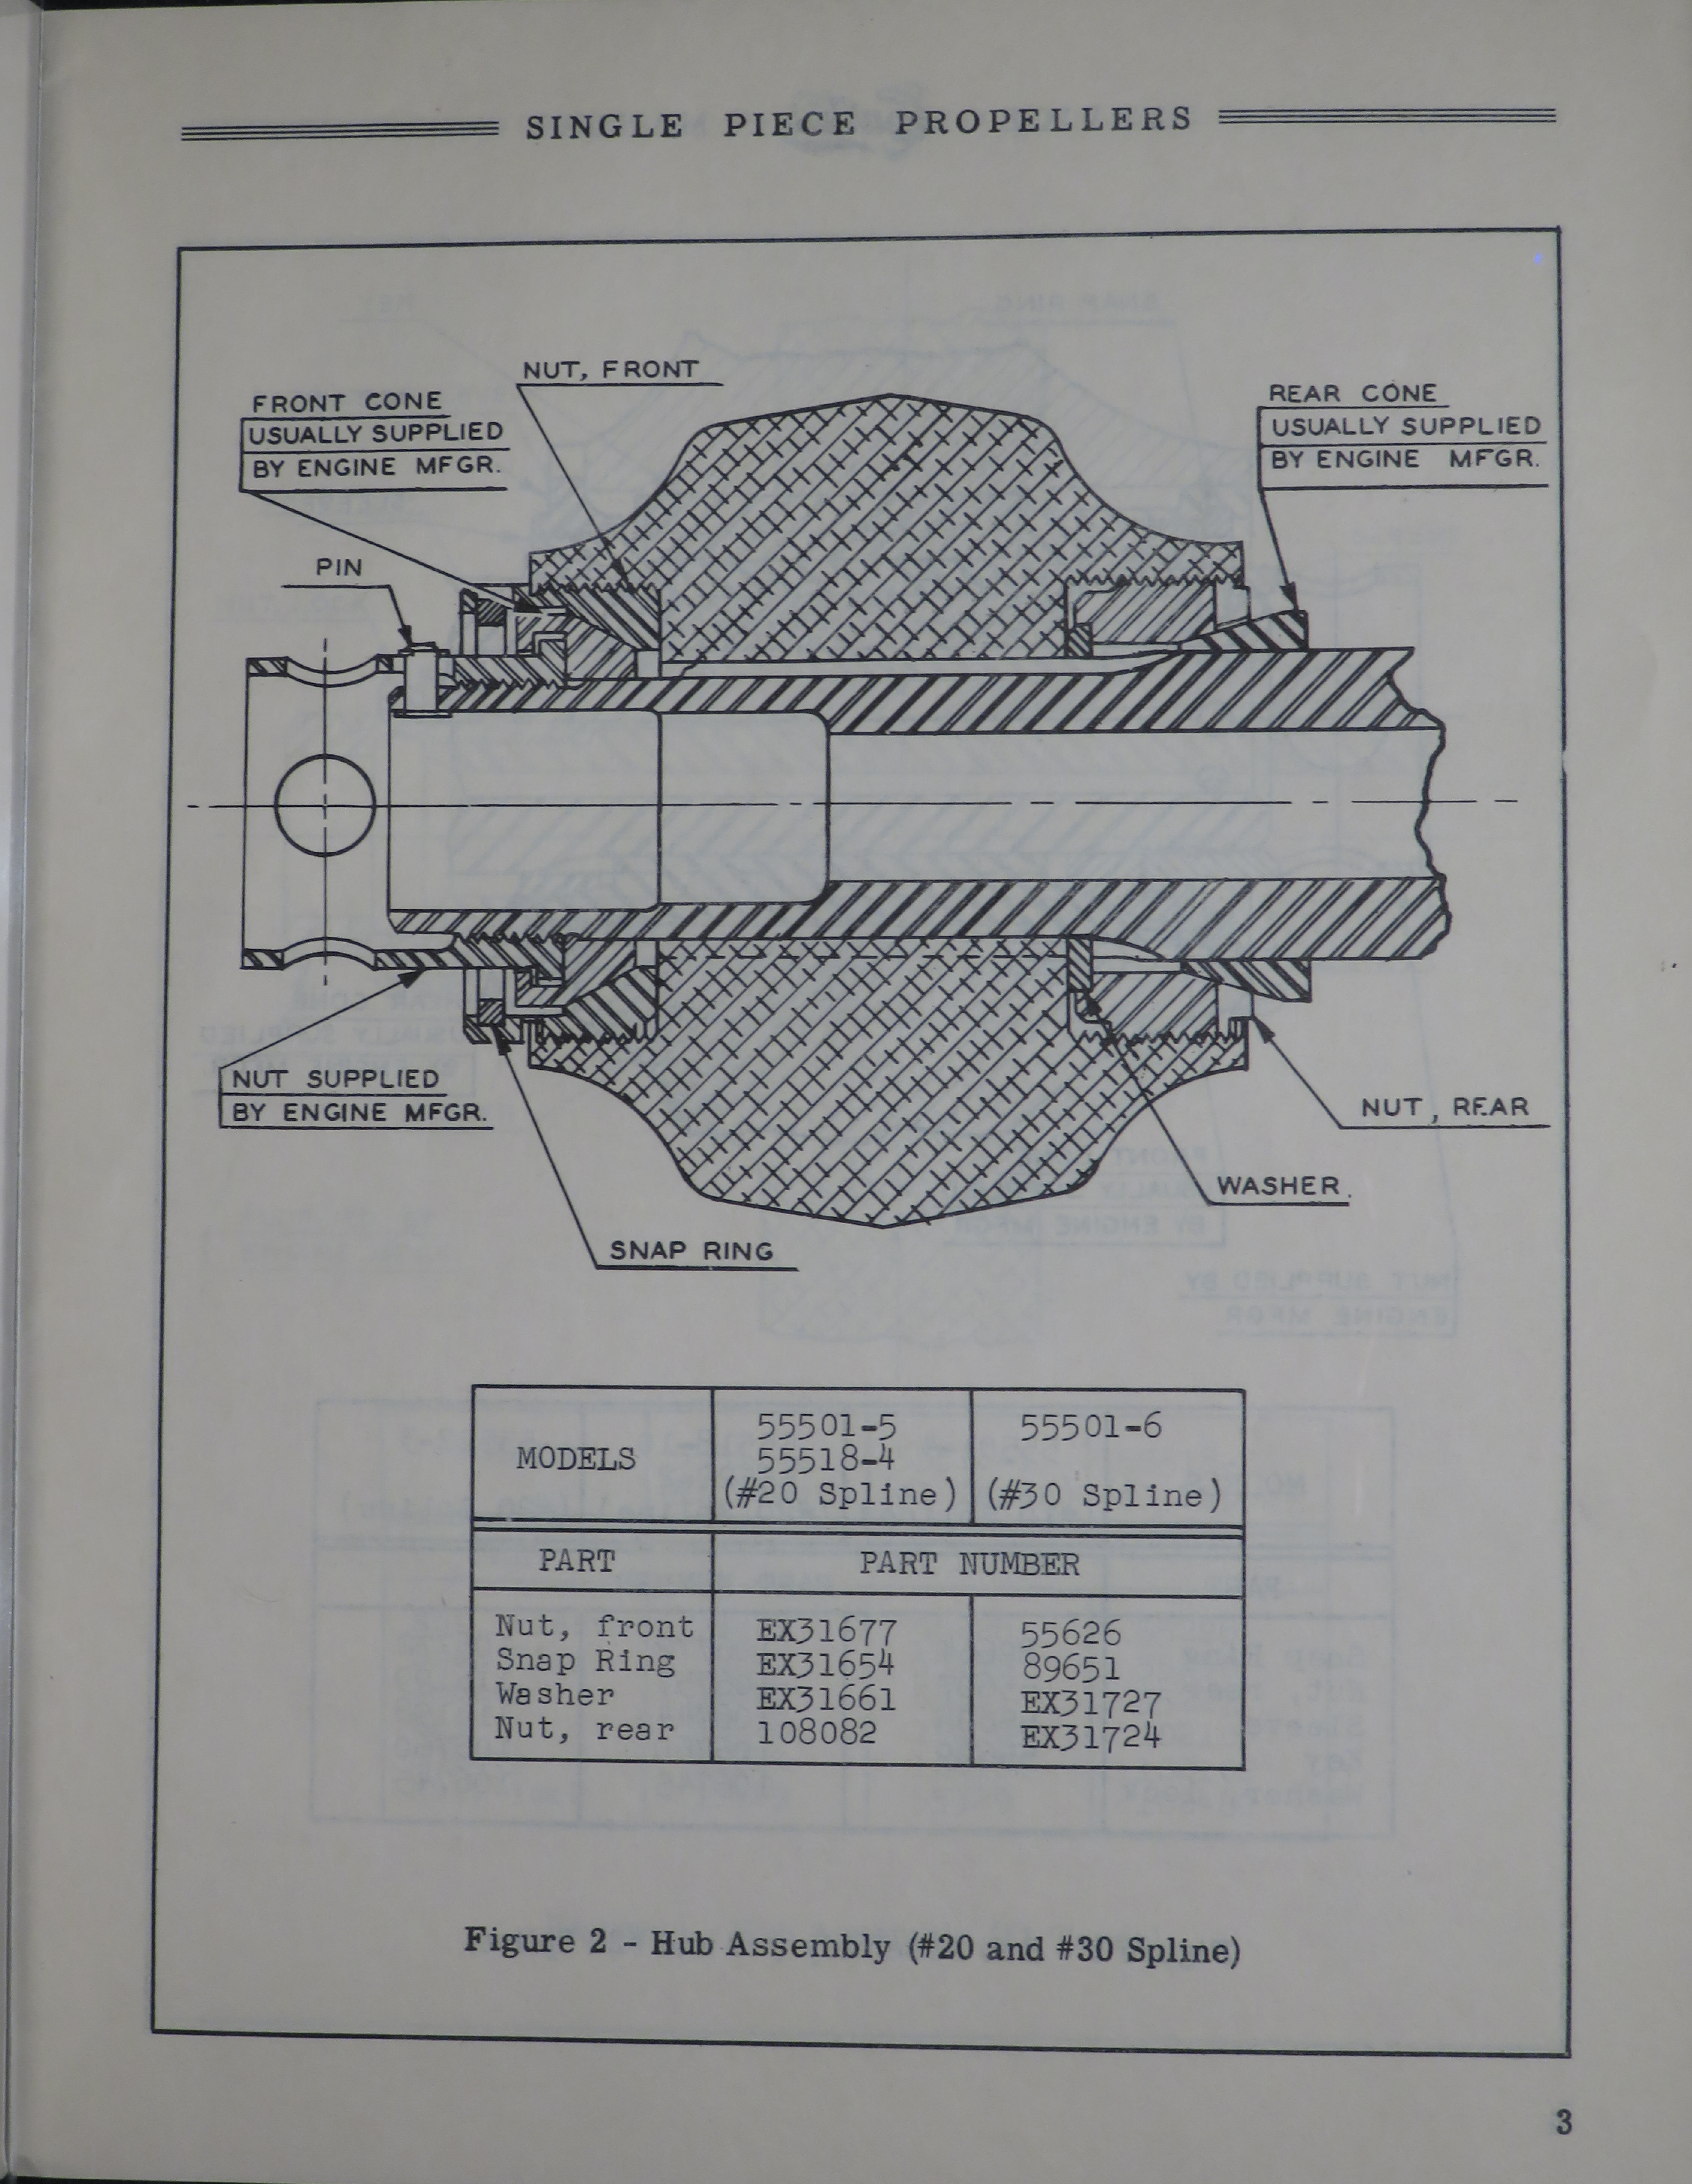 Sample page 5 from AirCorps Library document: Installation and Maintenance Instructions for Curtiss Single Piece Propellers